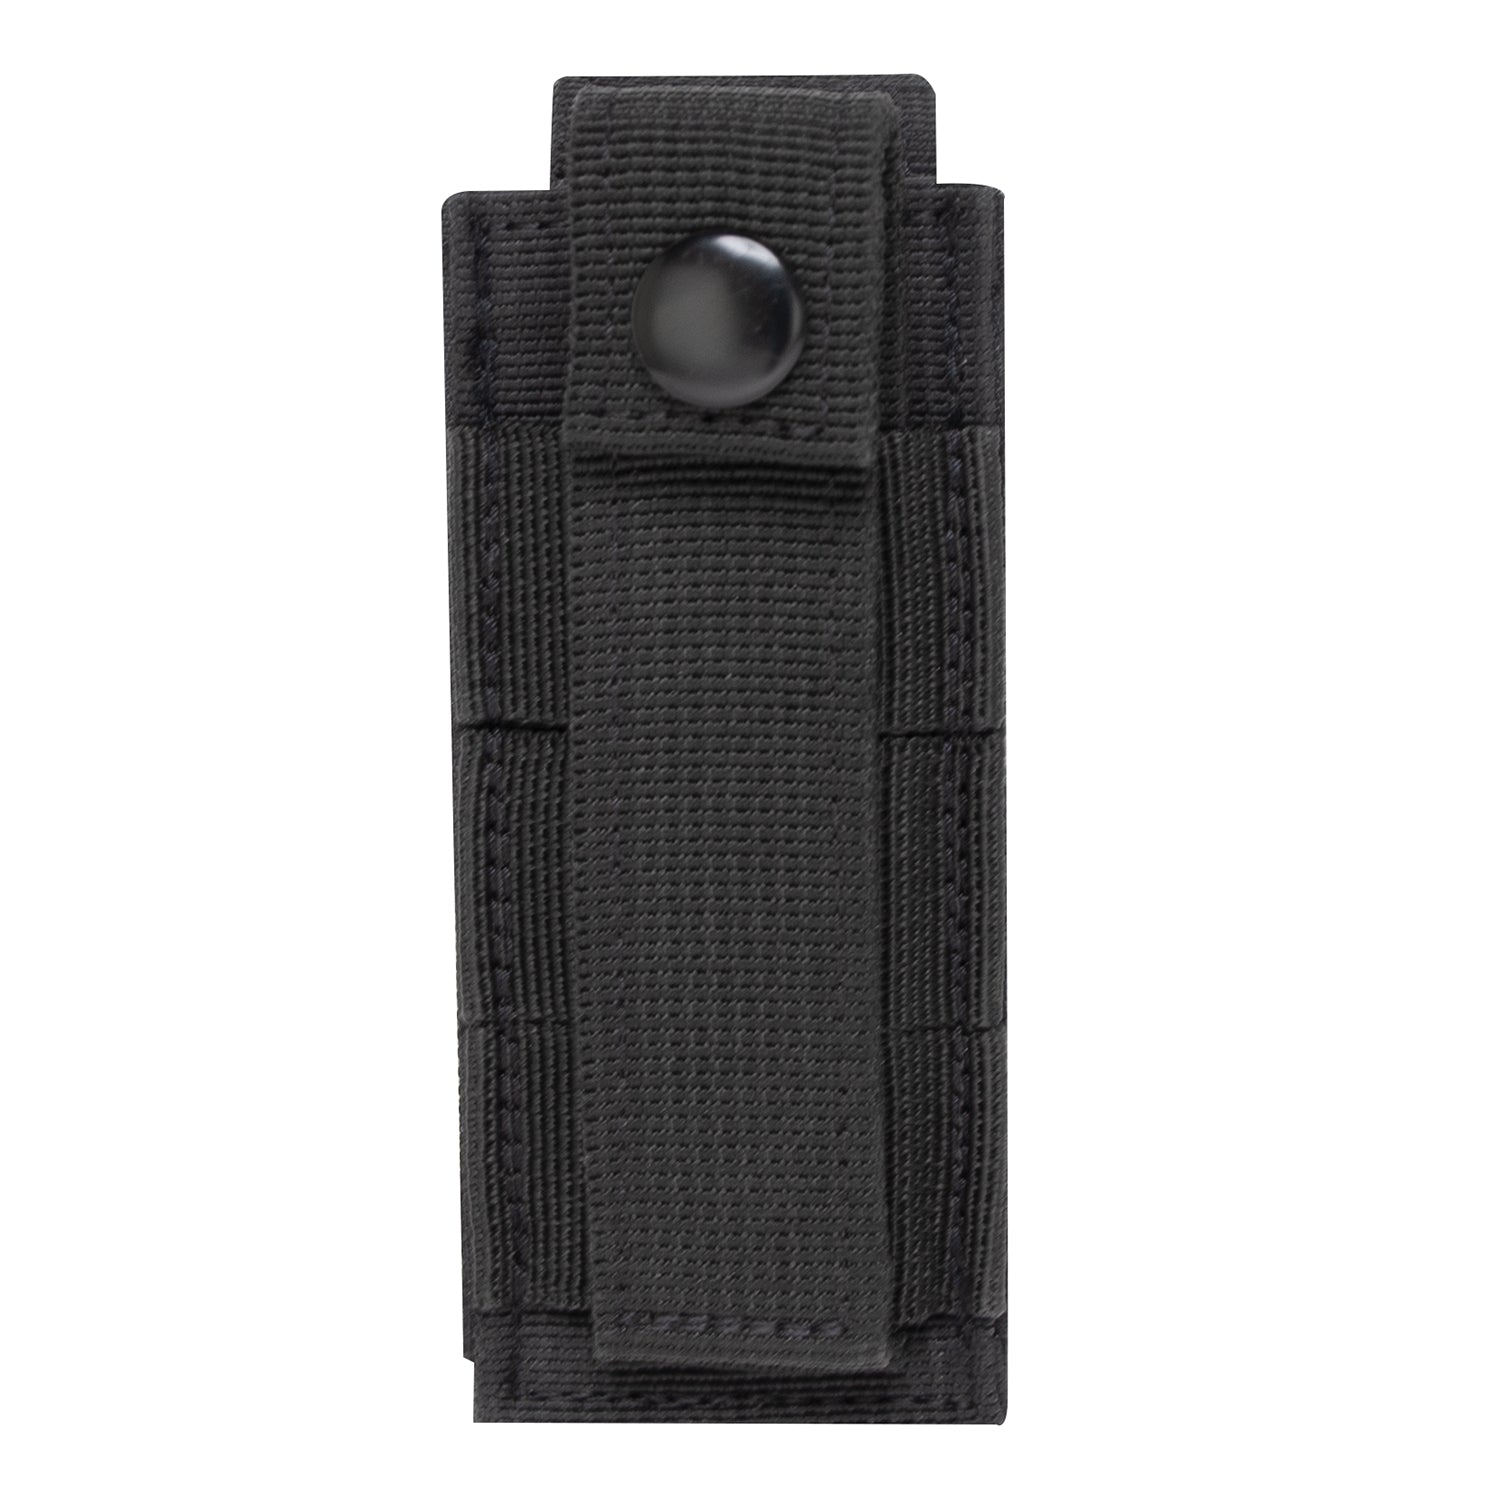 Rothco MOLLE Pepper Spray Pouch